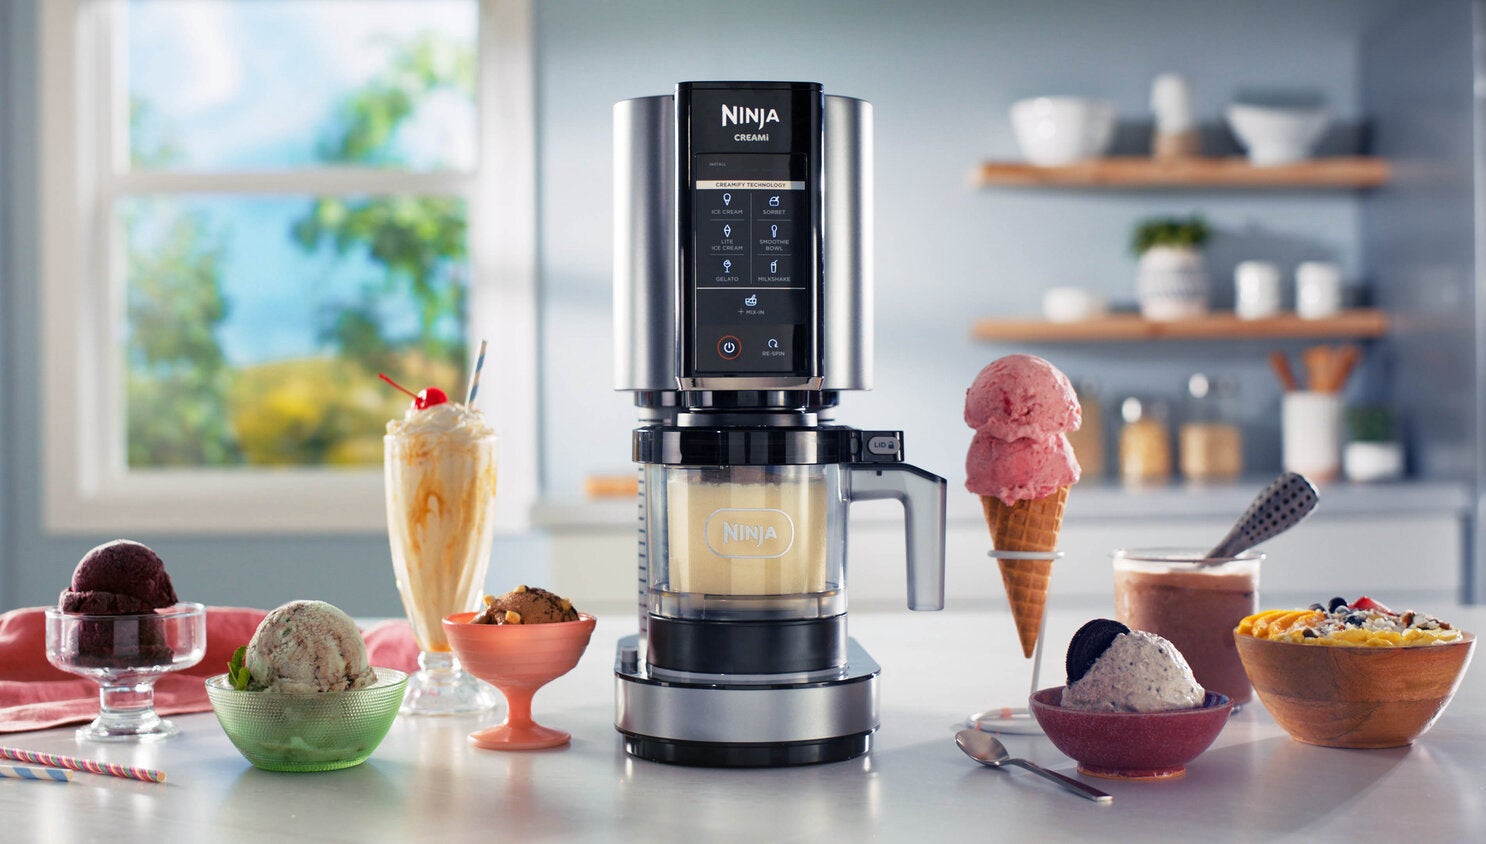 The 10 Best Ice Cream Makers of 2022